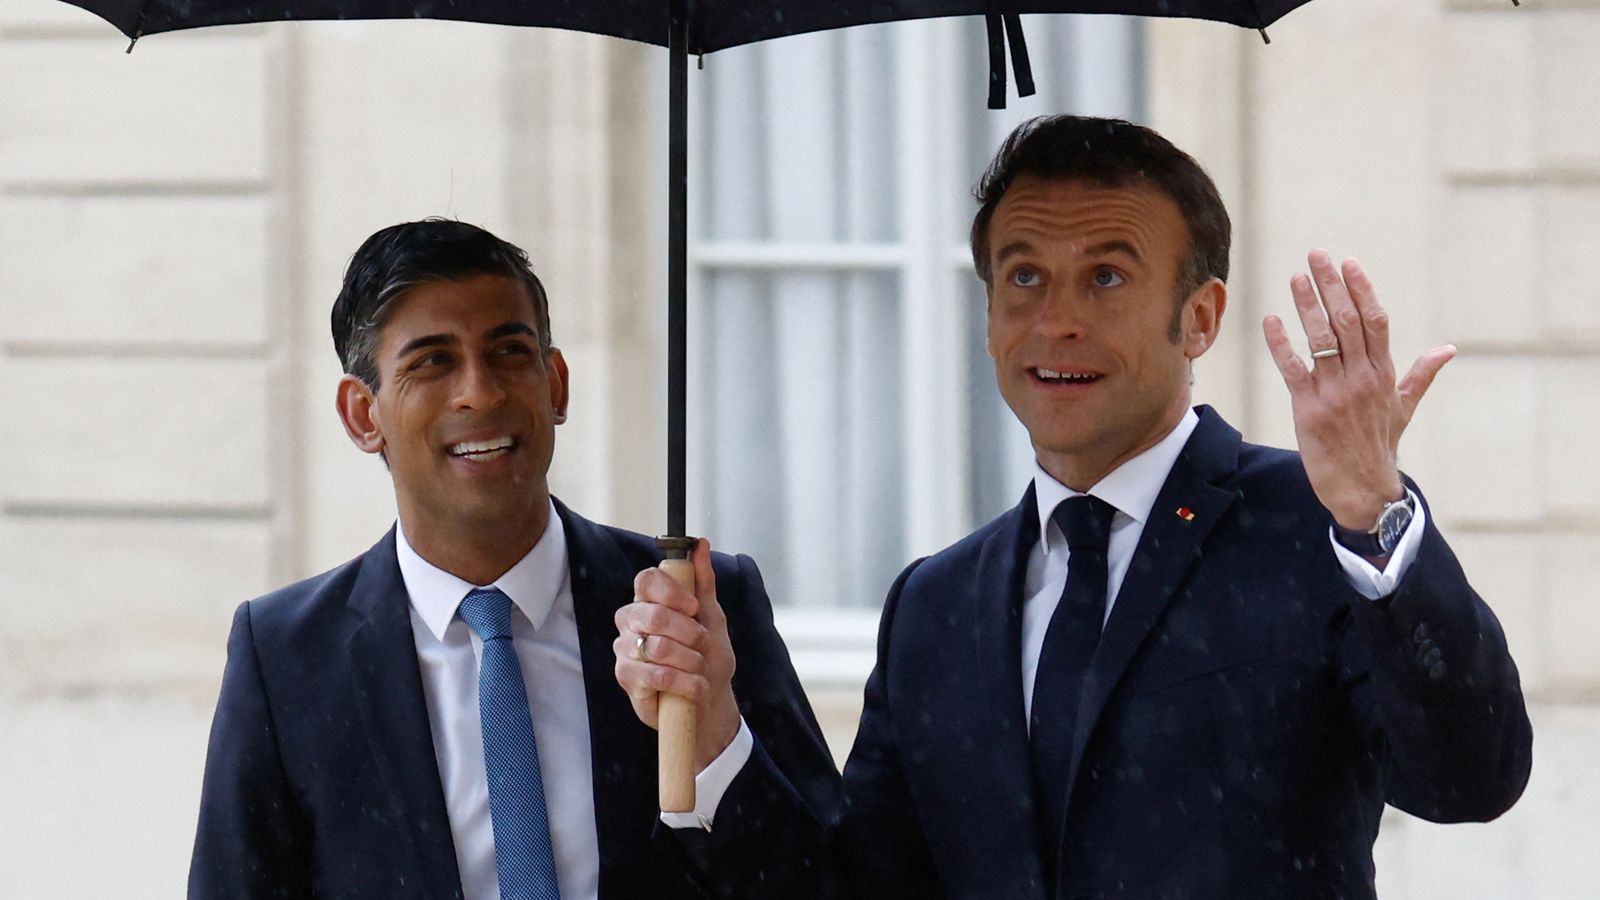 The key announcements as Sunak and Macron hail 'new beginning' at UK-France summit in Paris